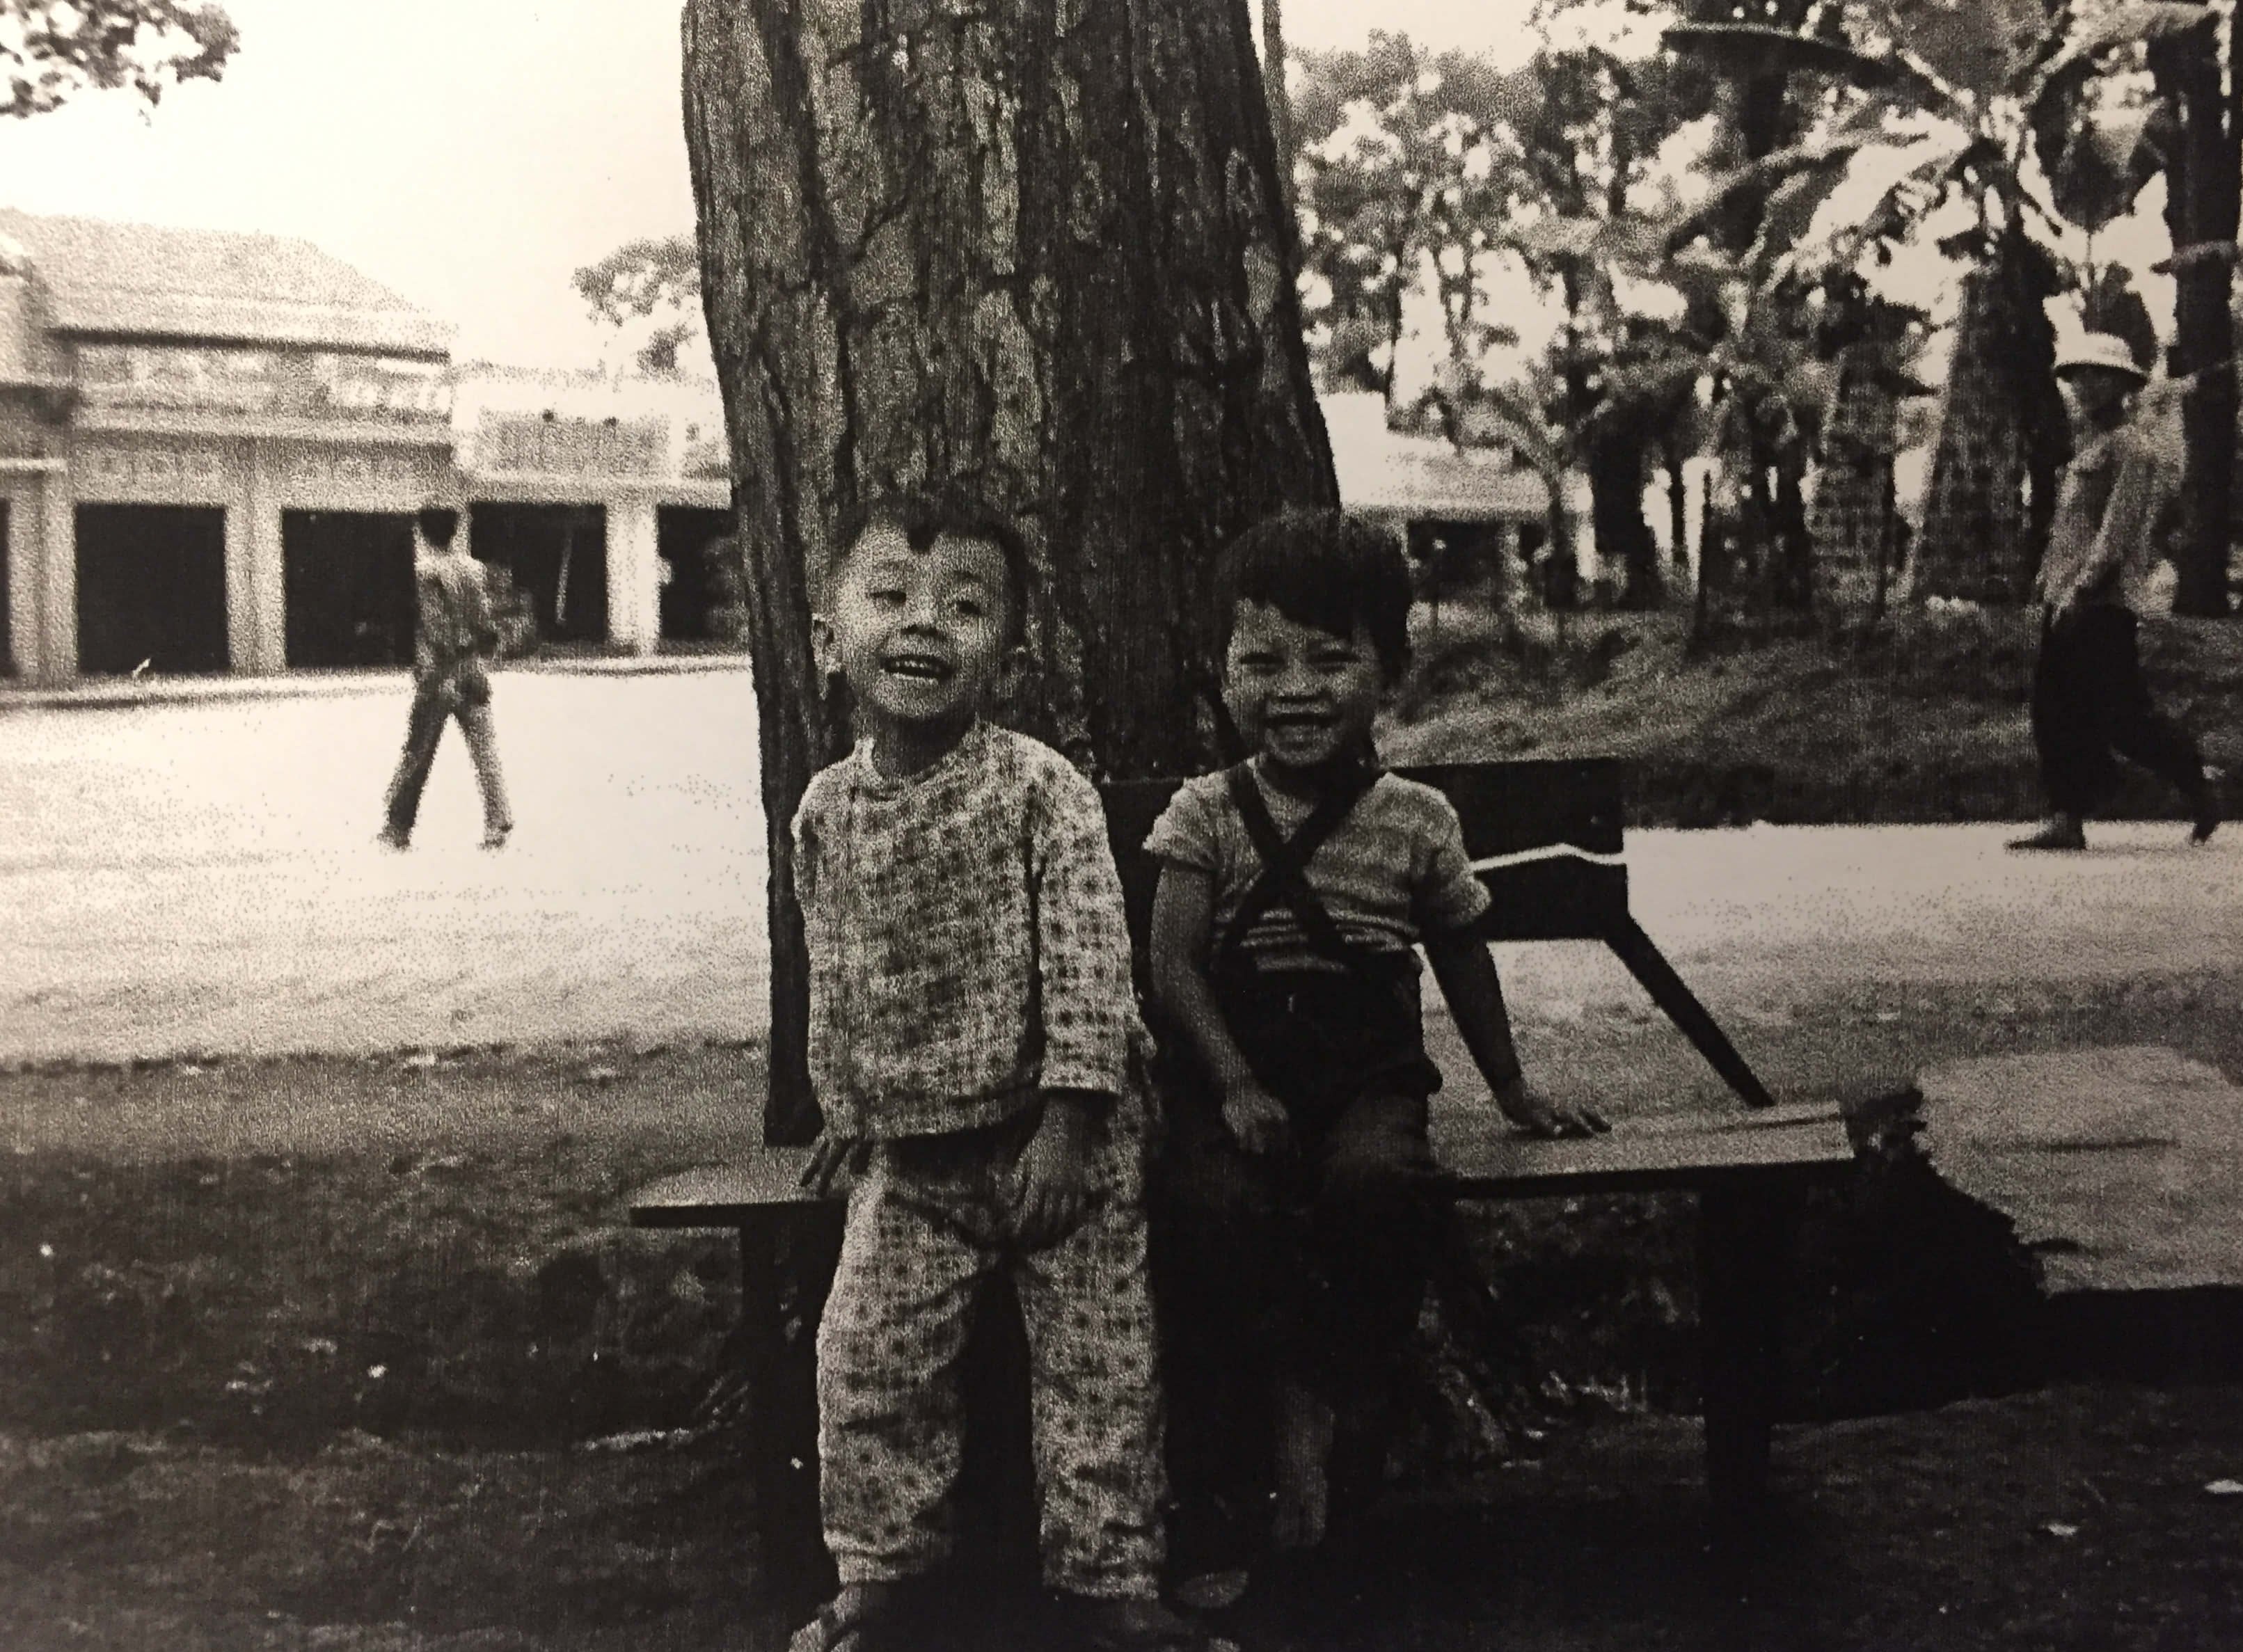 Two young Asian boys laughing on a bench under the shade of a tree.